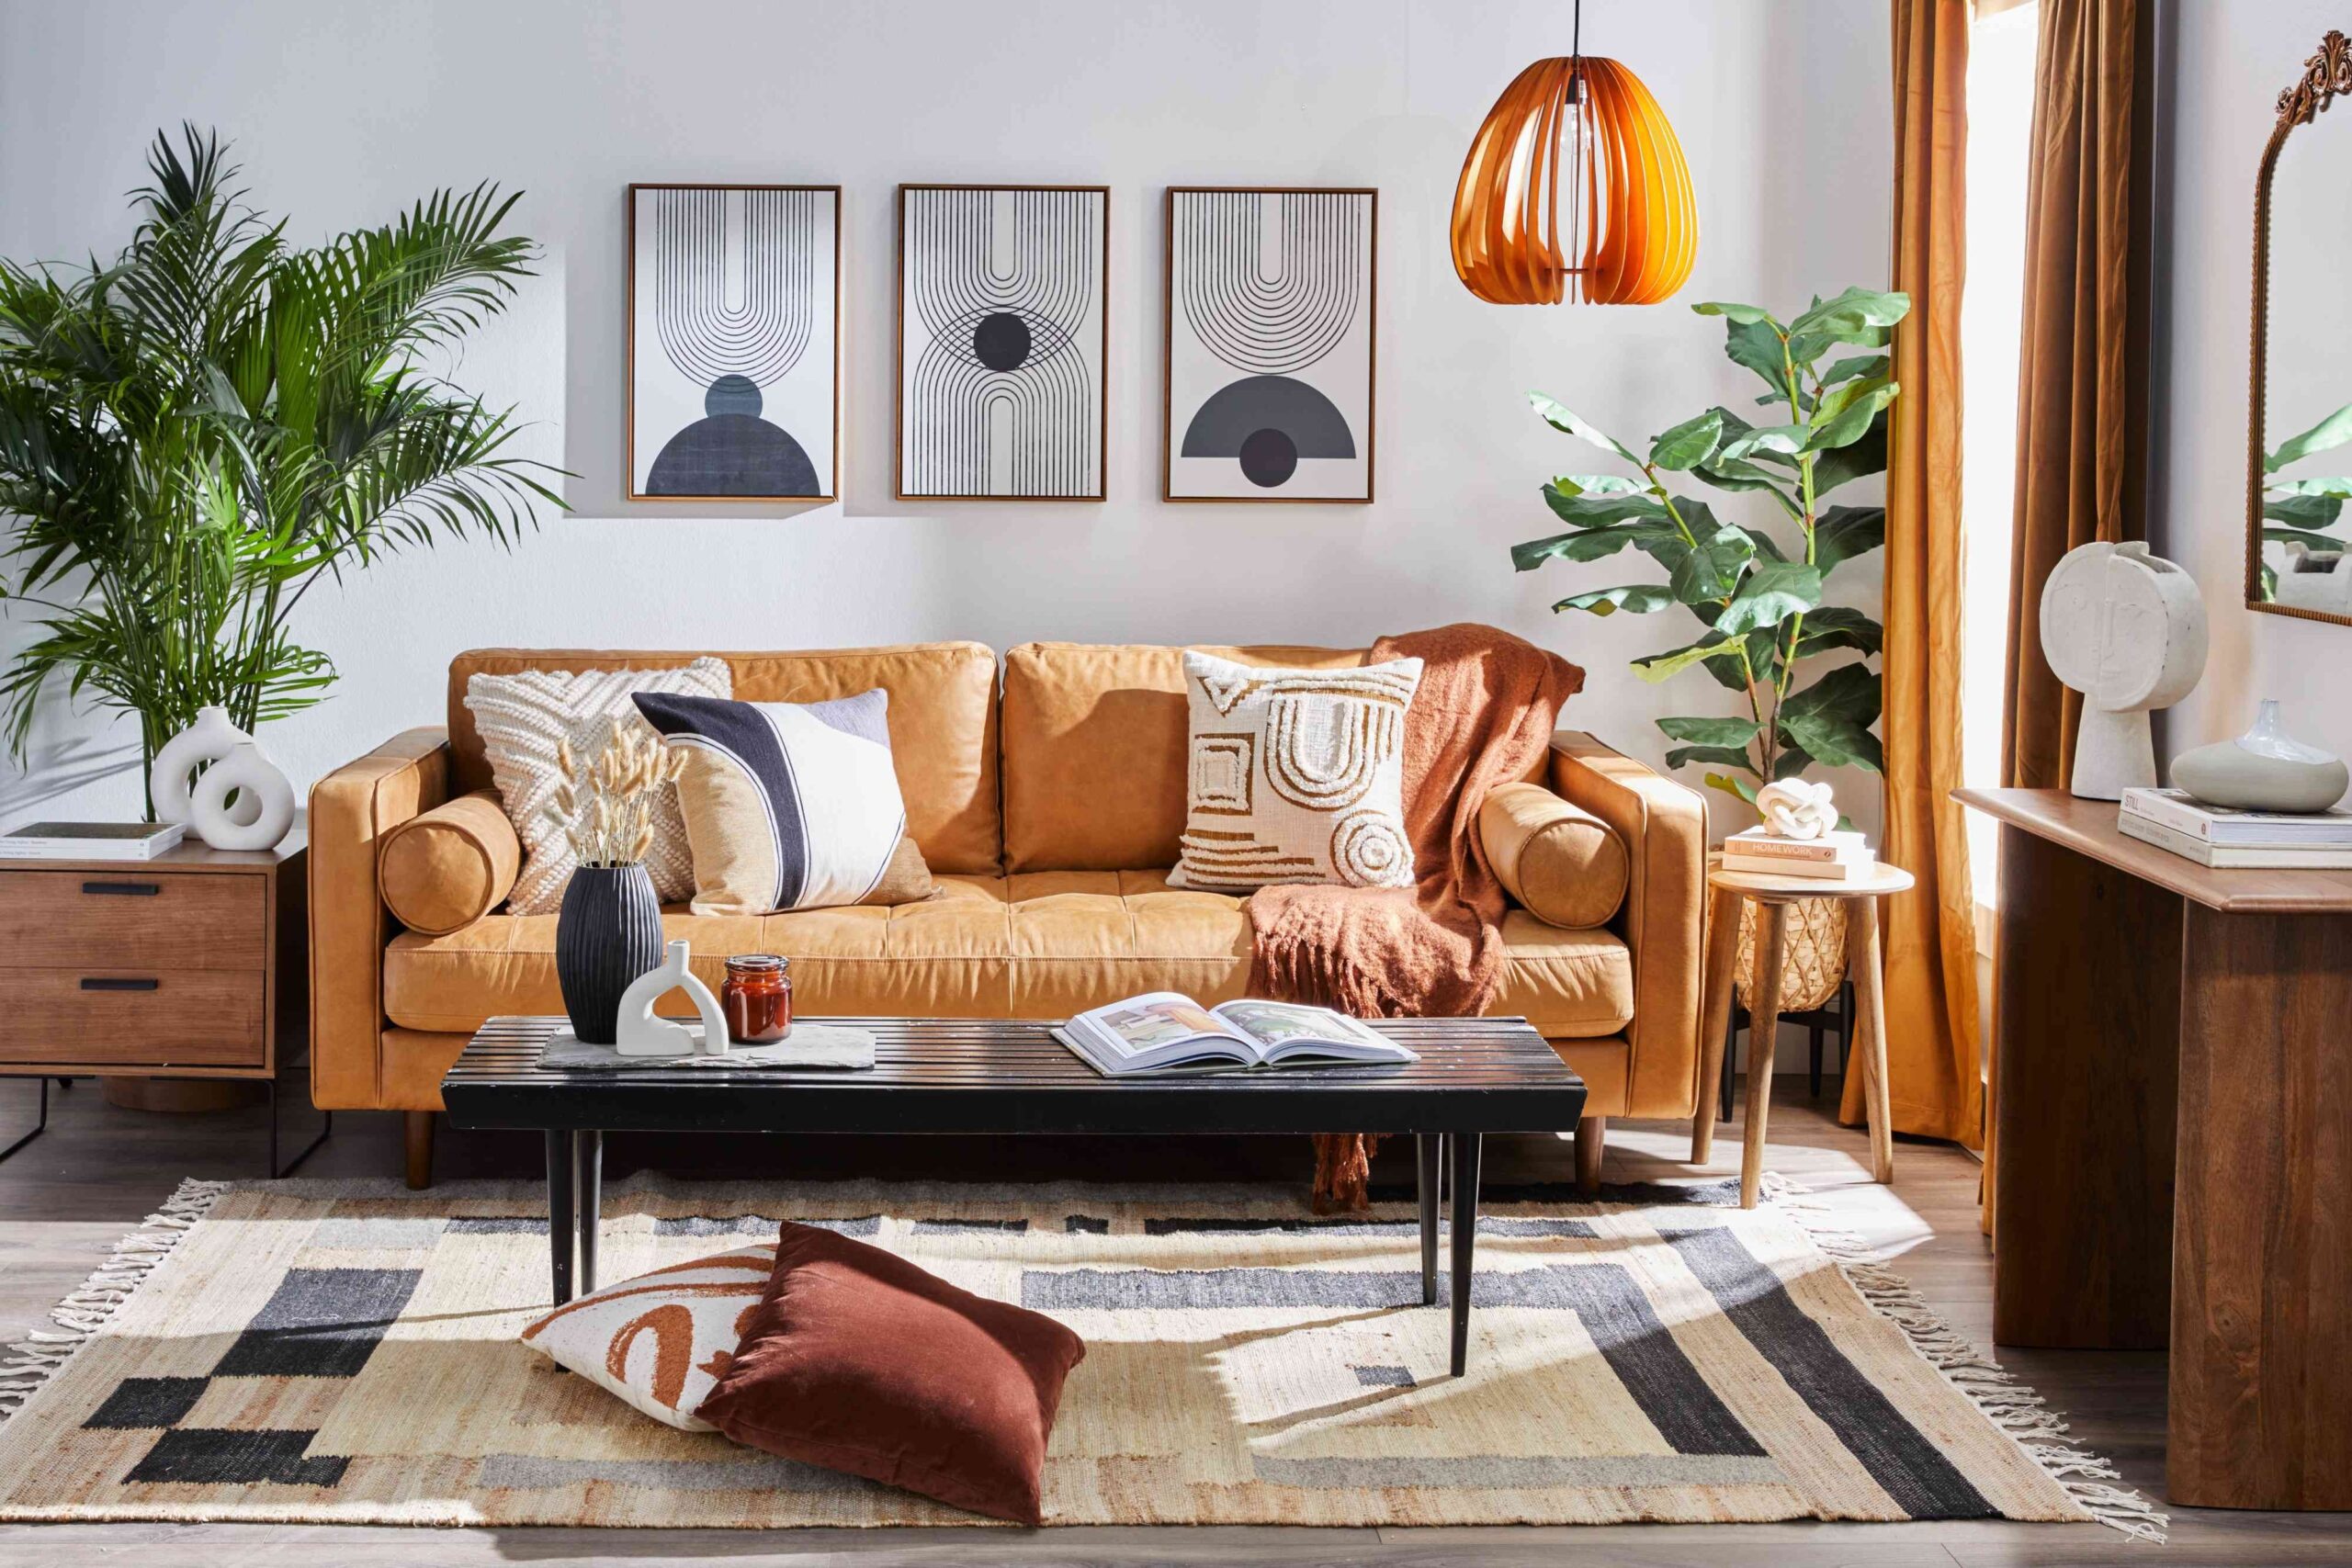 77 Living Room Decor Ideas To Up Your Styling Game inside Living Room Decorating